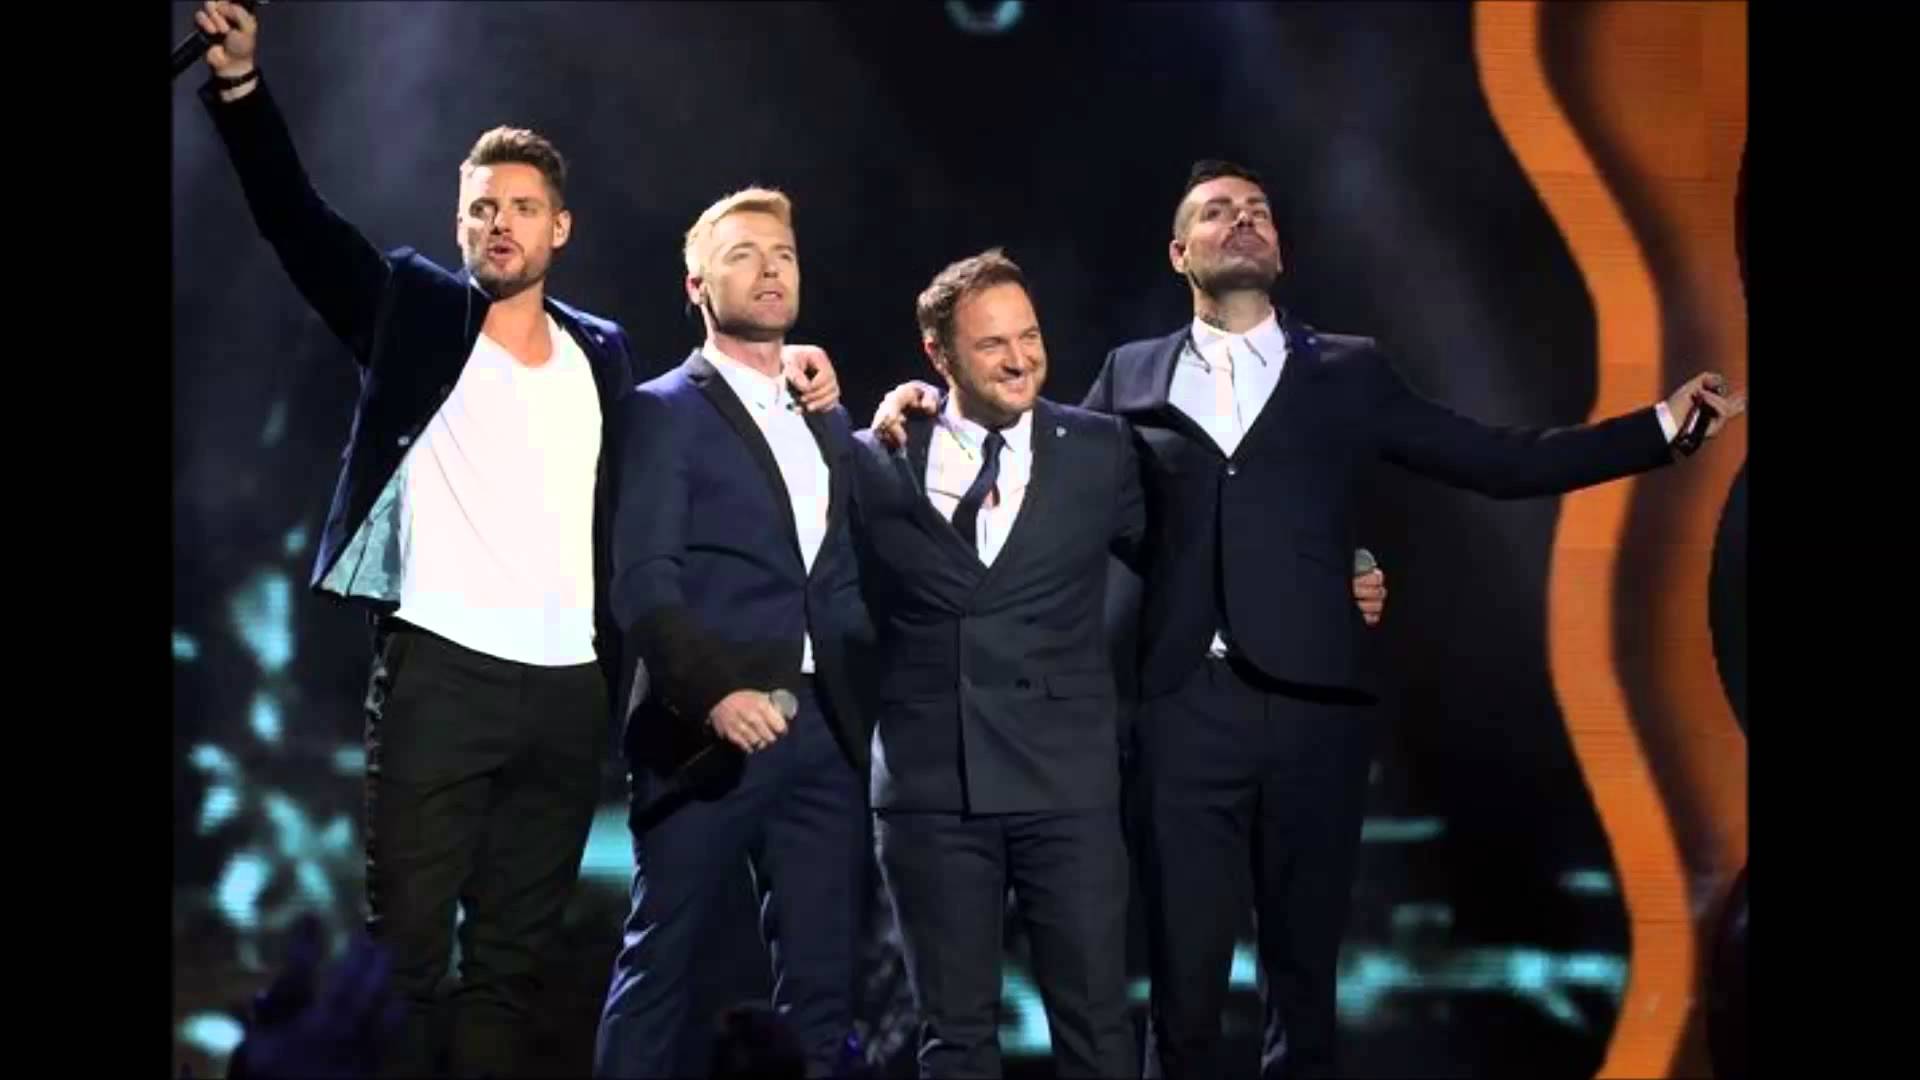 Boyzone - Best night of our lives - YouTube